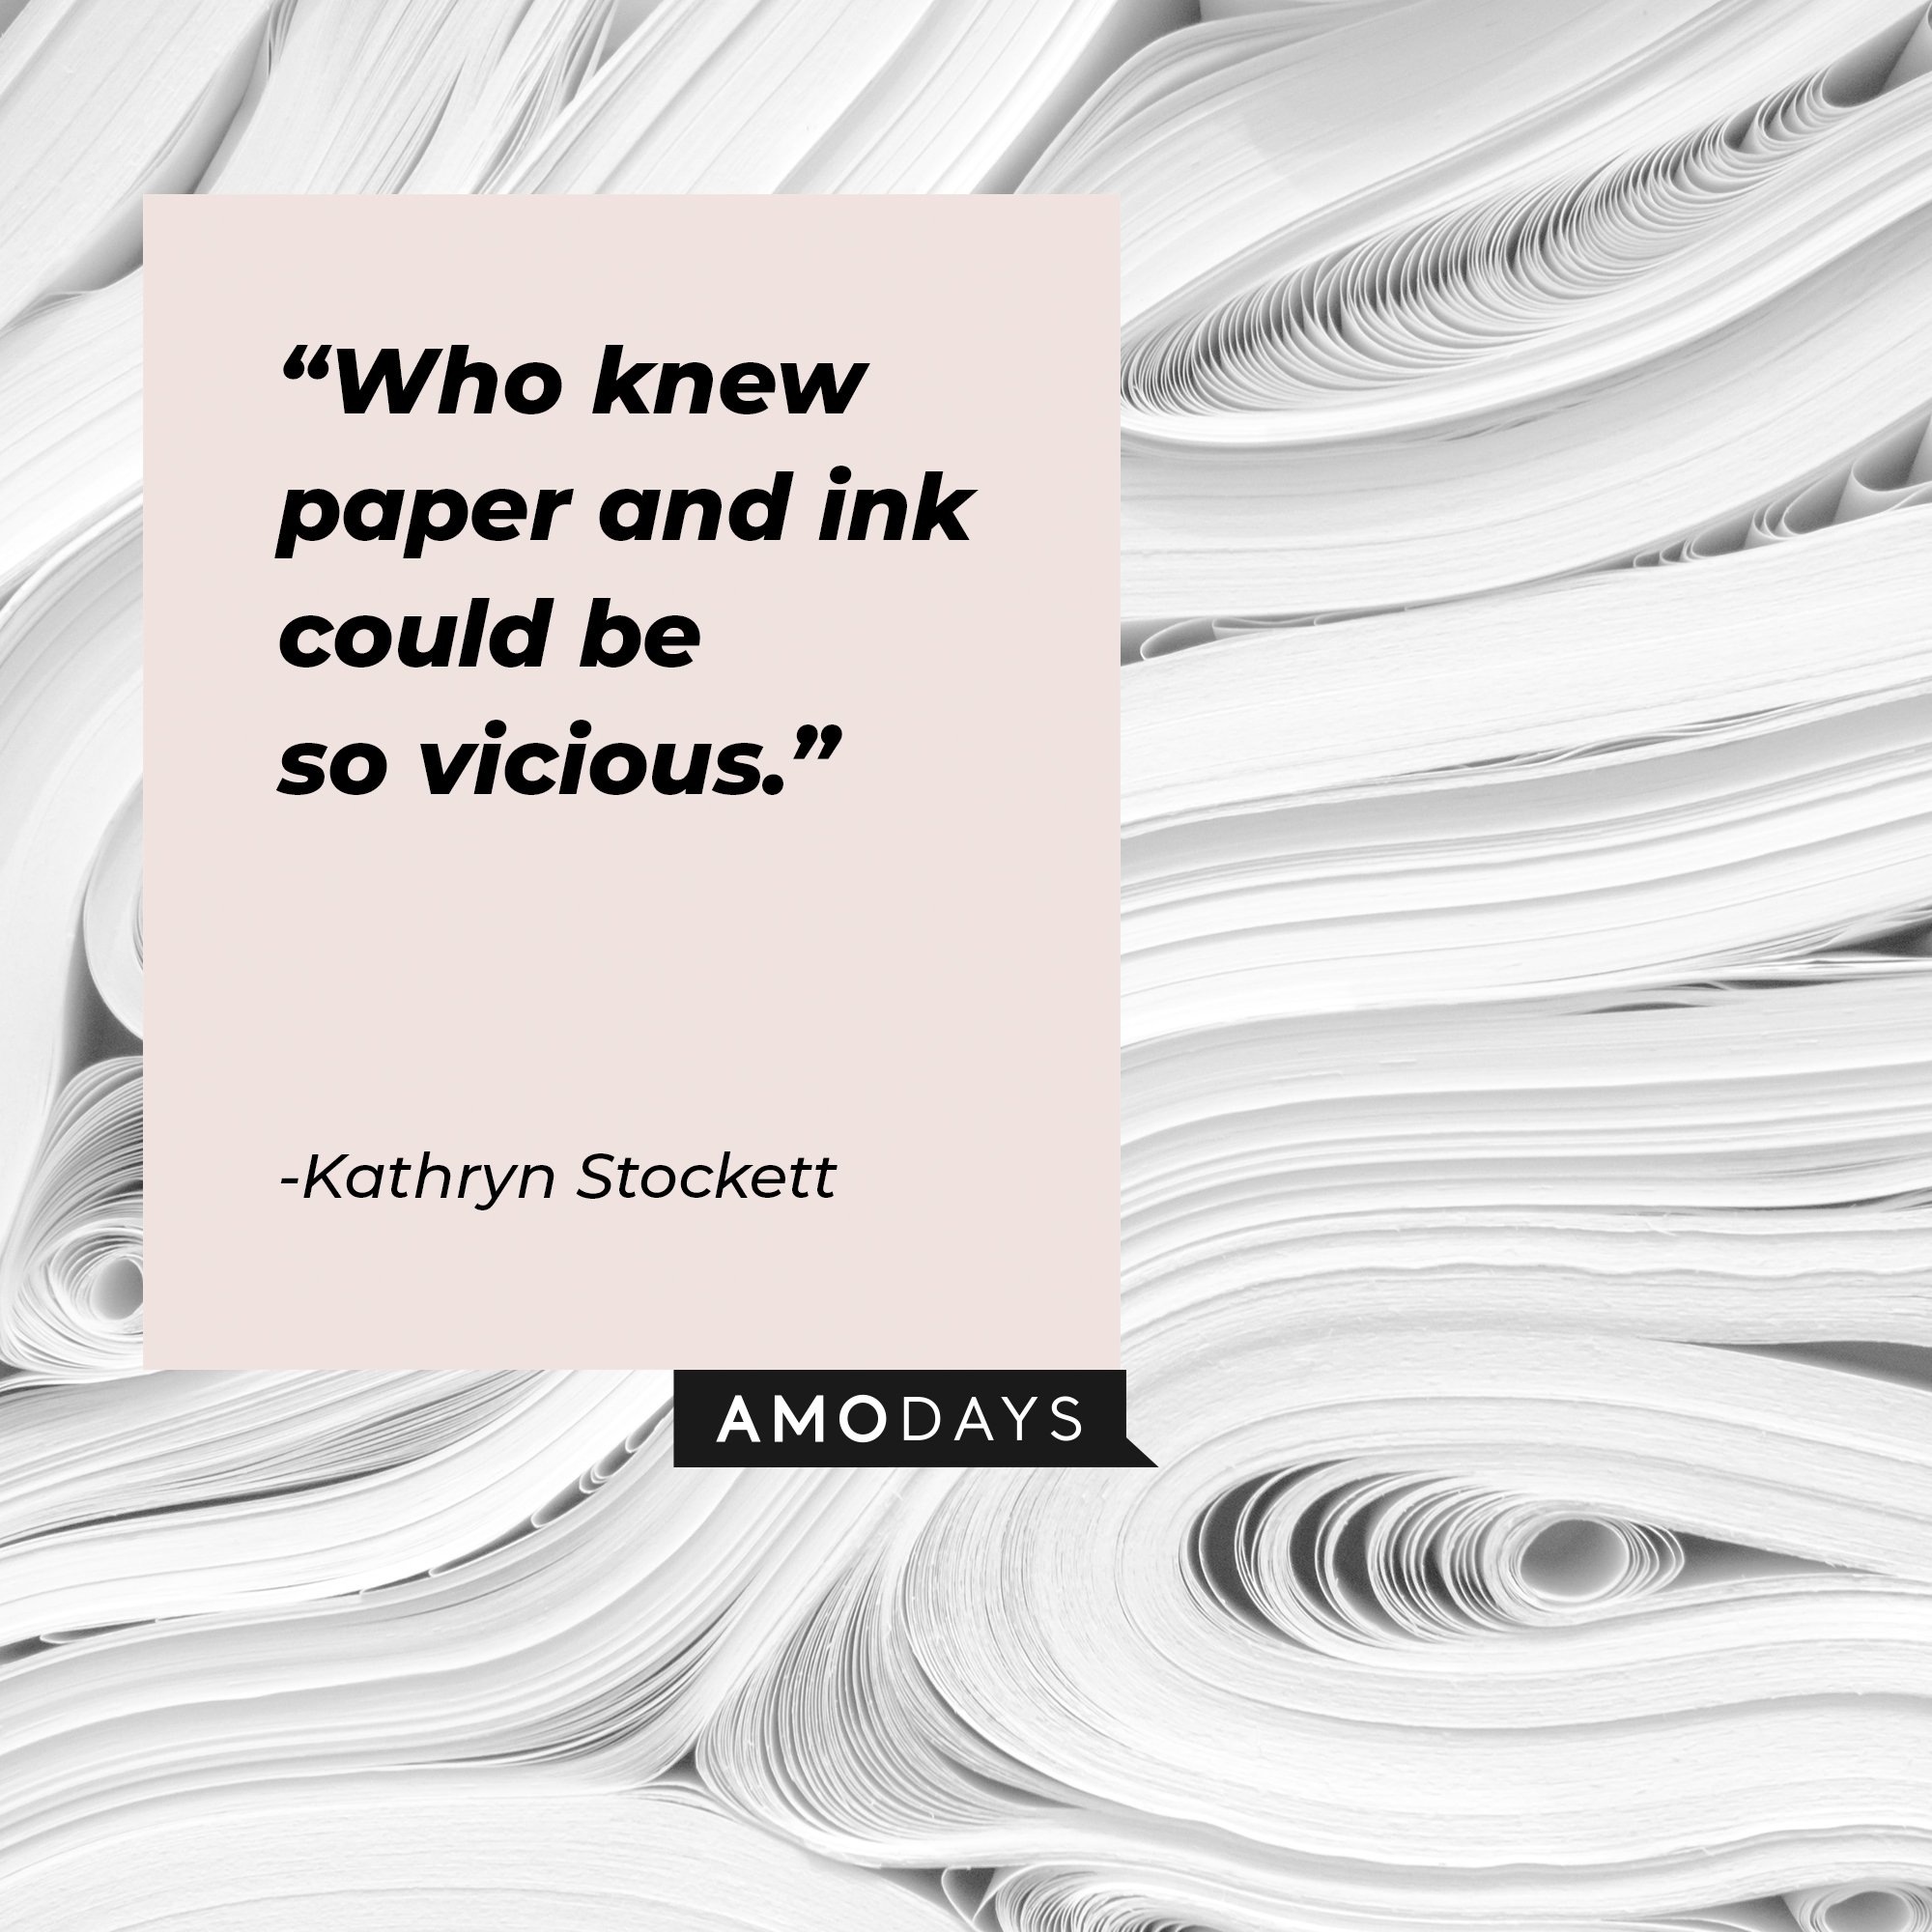  Kathryn Stockett’s quote: "Who knew paper and ink could be so vicious." | Image: AmoDays